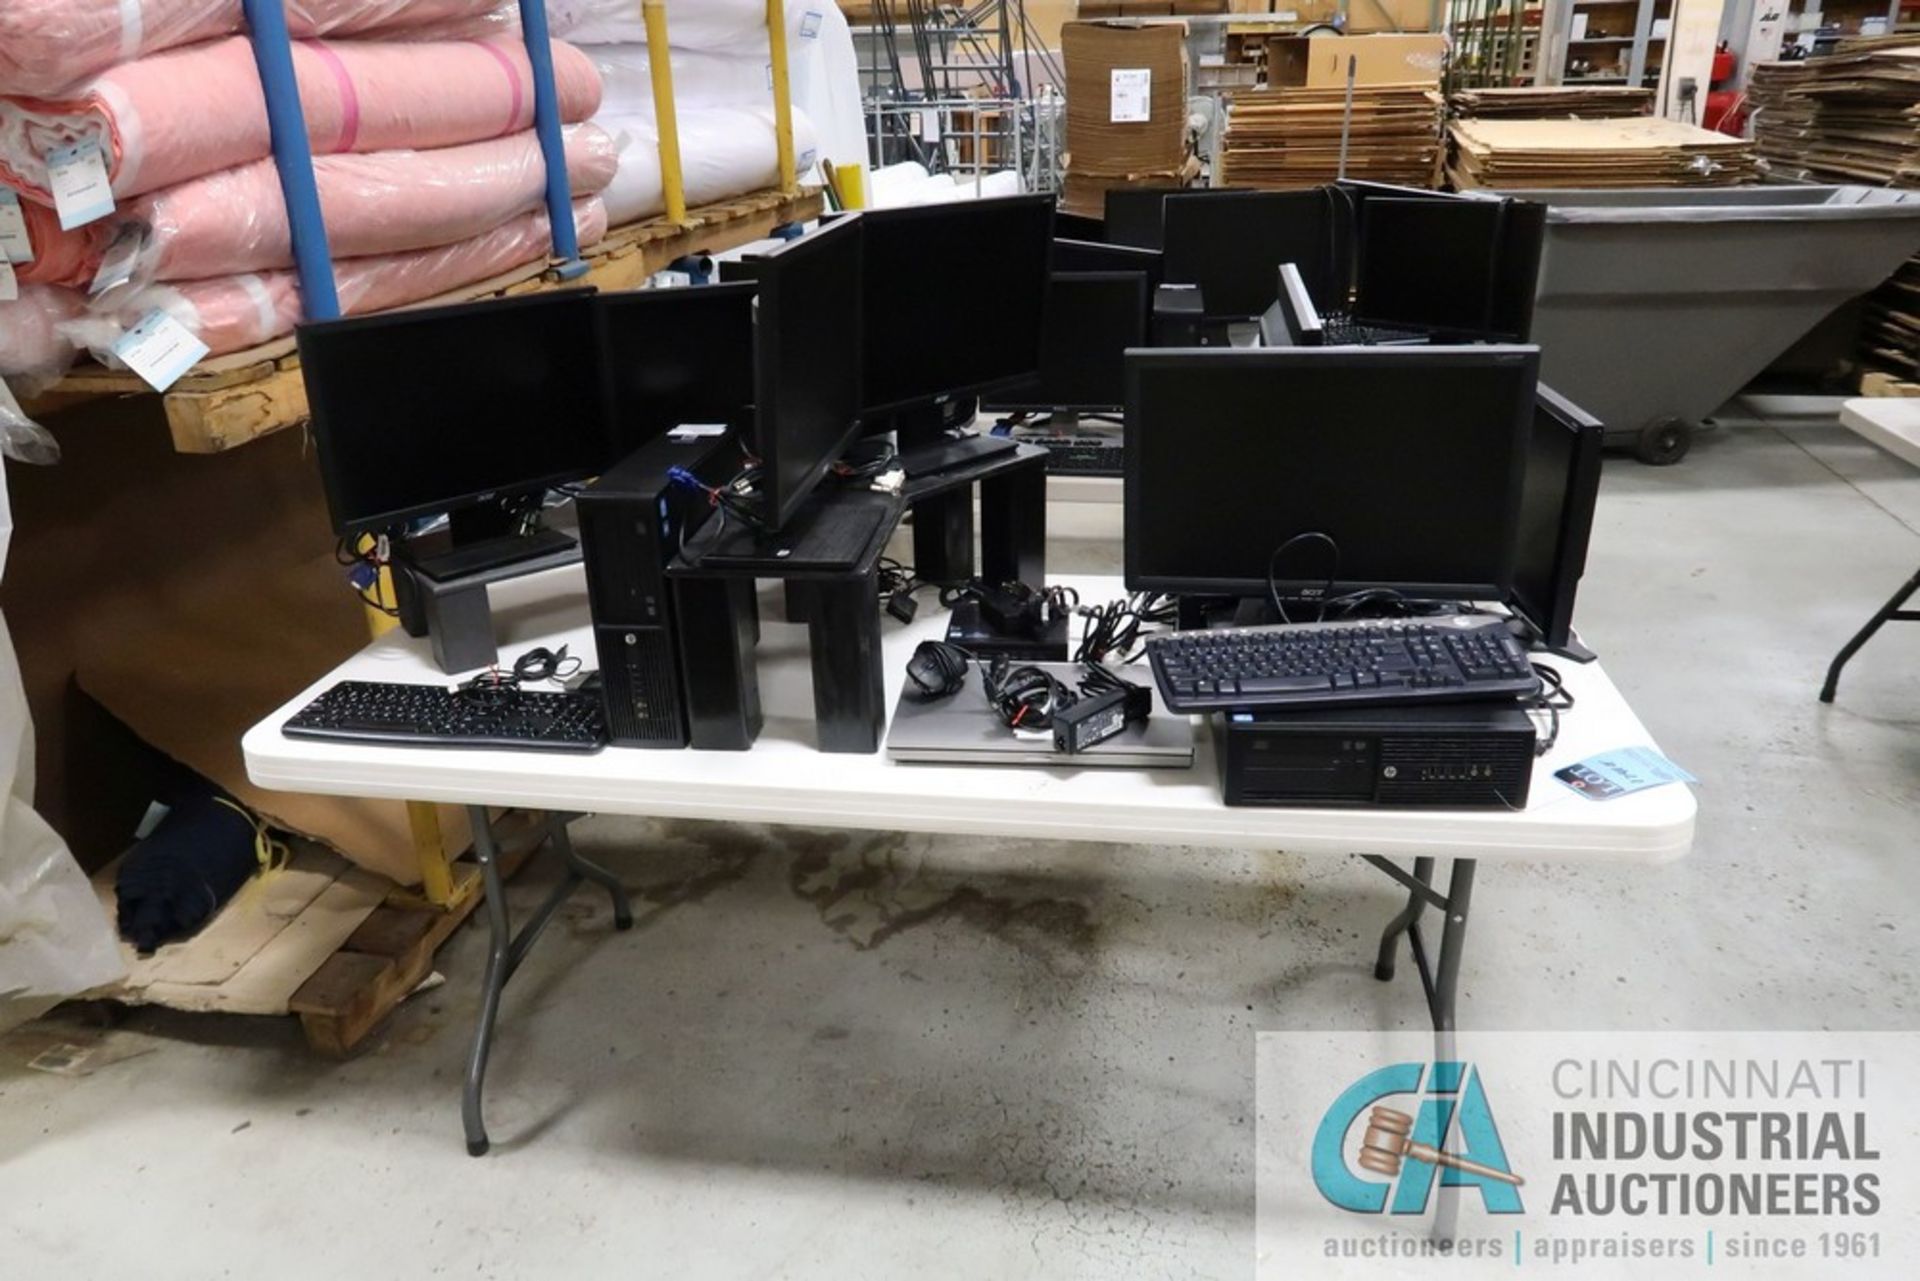 (LOT) MISCELLANEOUS COMPUTERS, MONITORS, KEYBOARDS, MICE